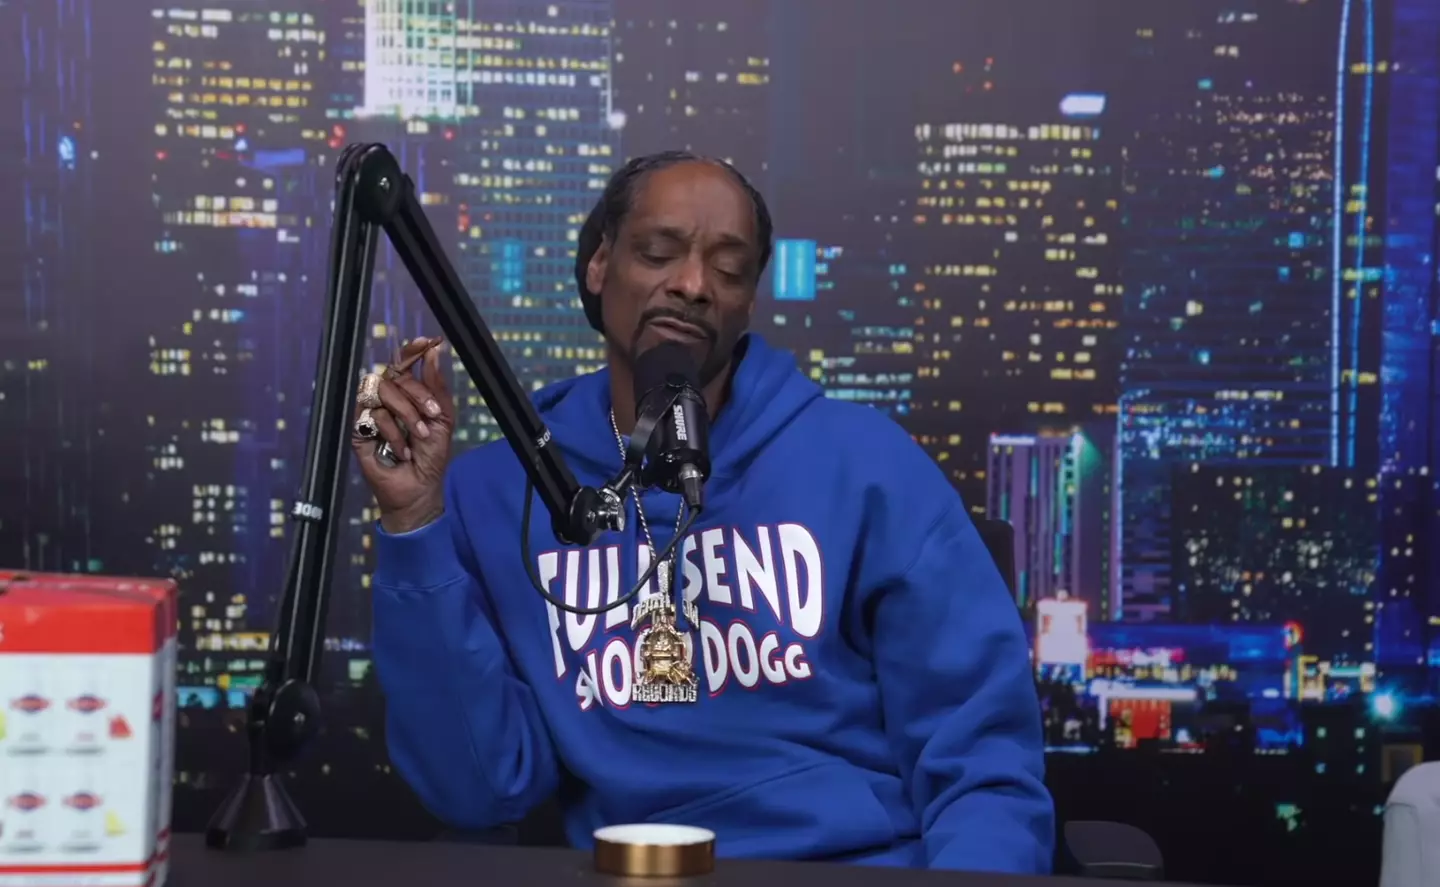 Snoop shared his views on why Eminem doesn't work as much as he used to.